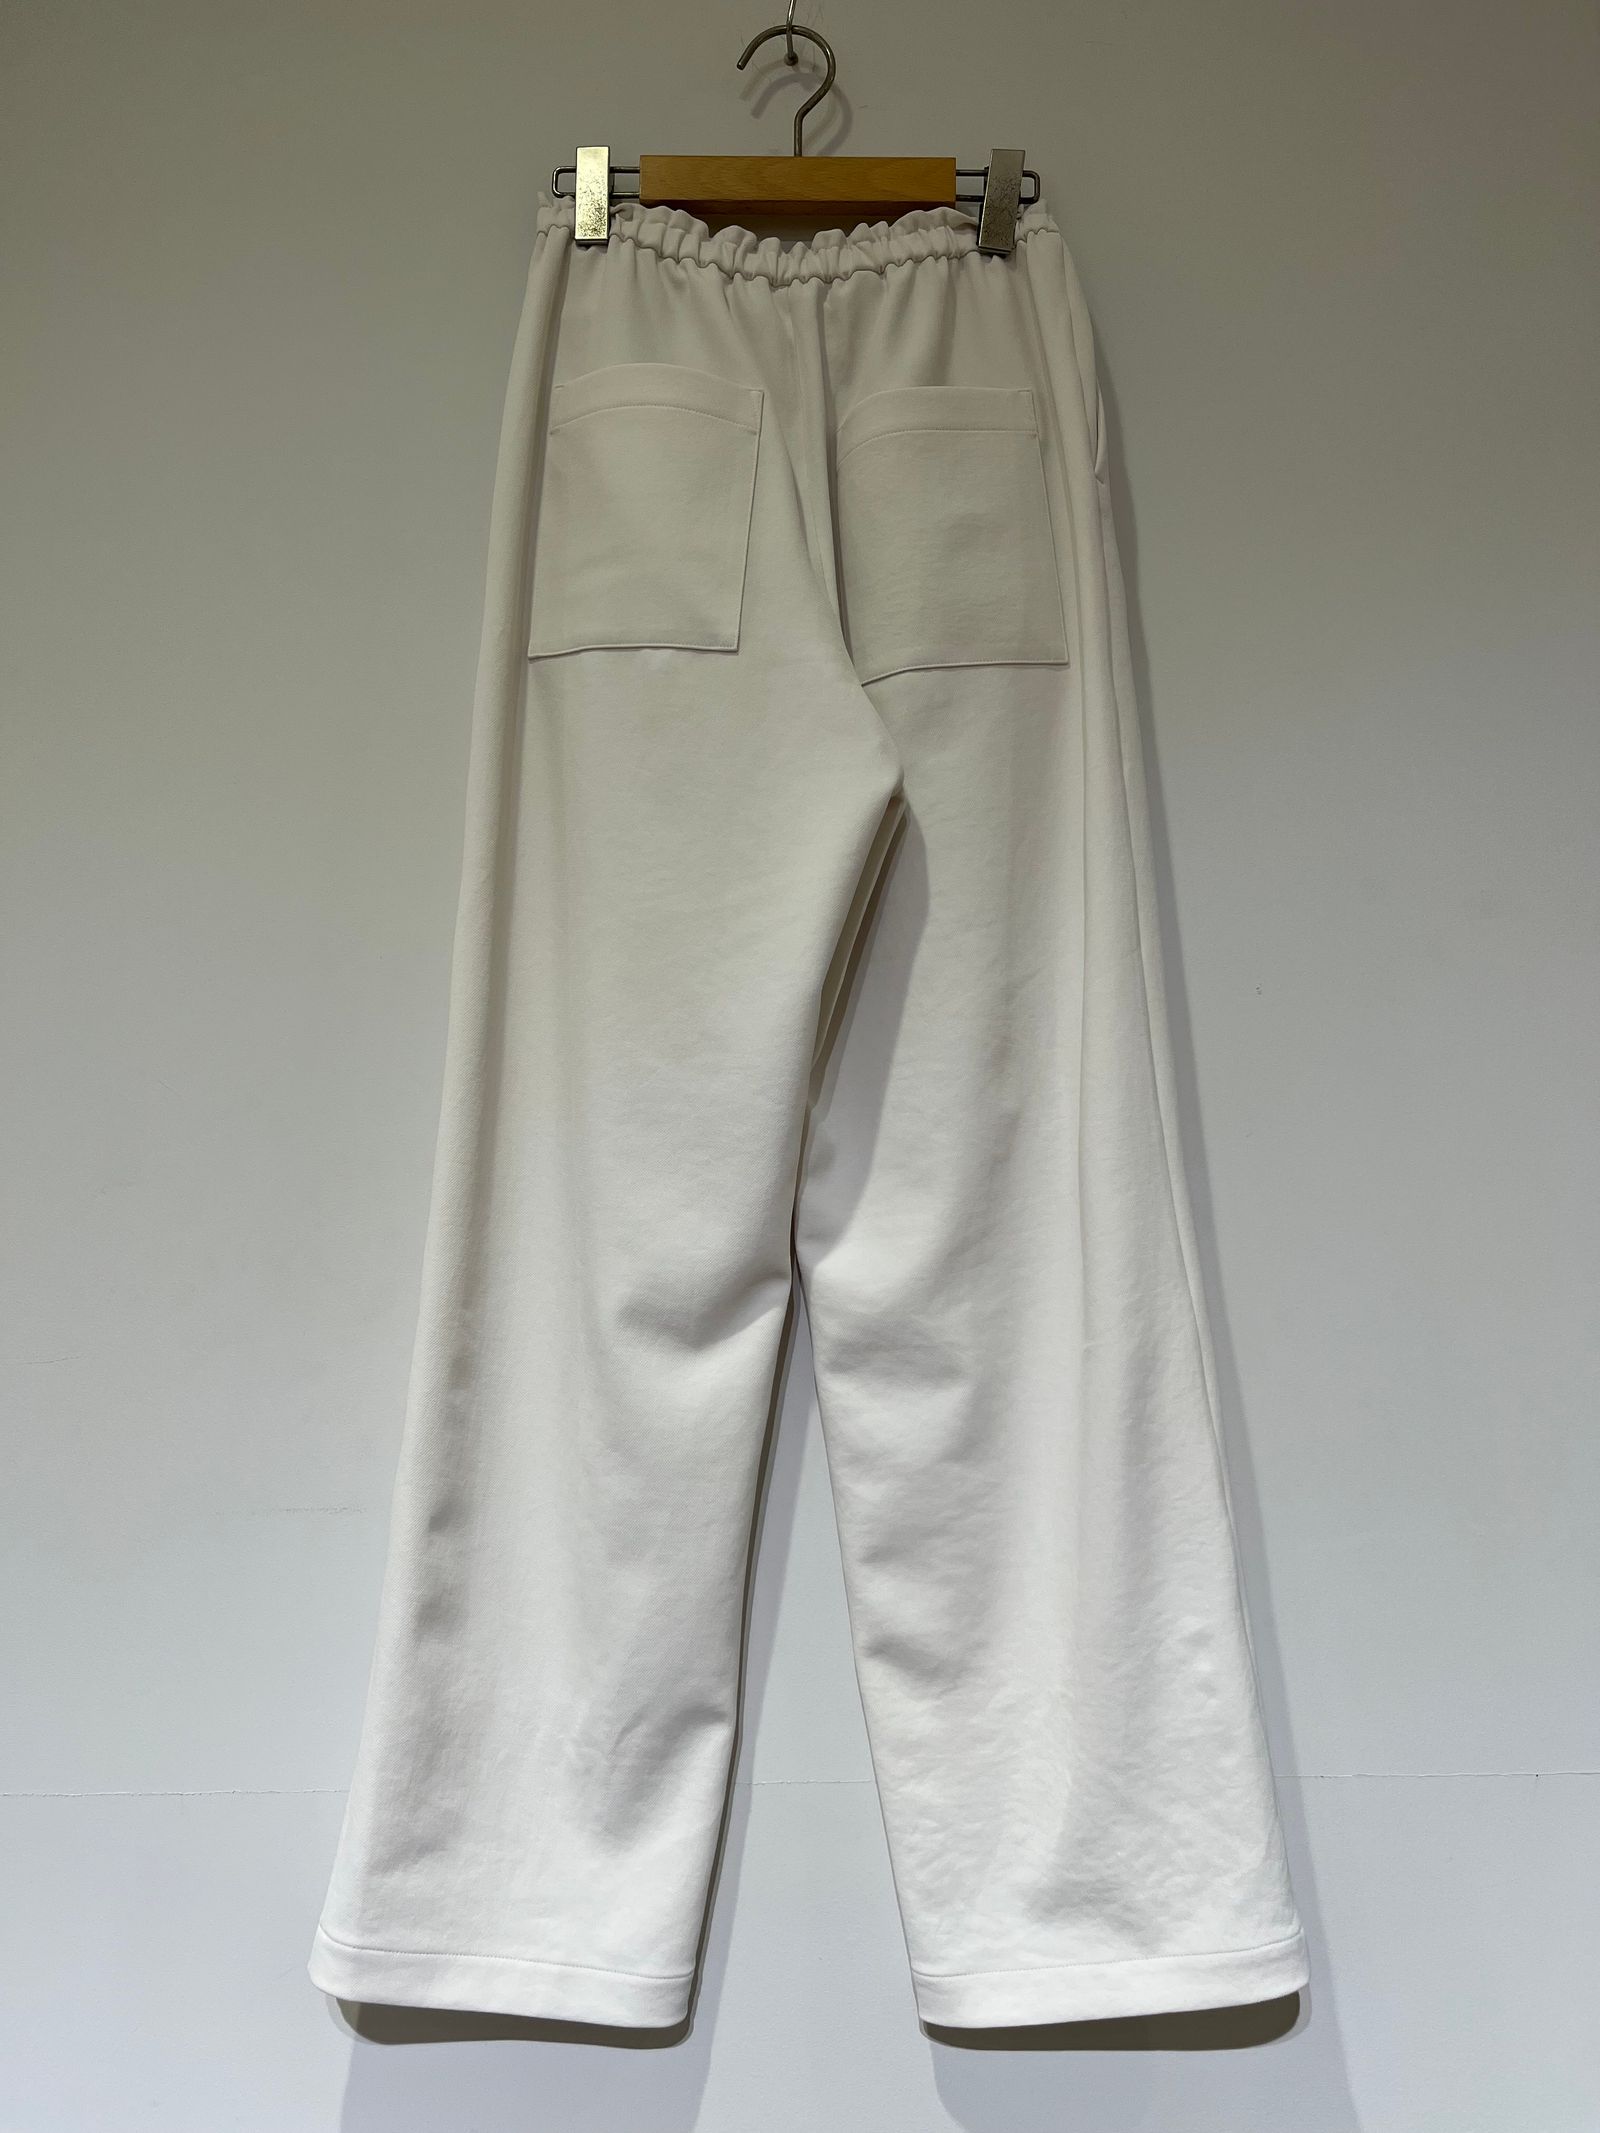 Greed International - Stretch Relax 2way Cloth Pants in Off White